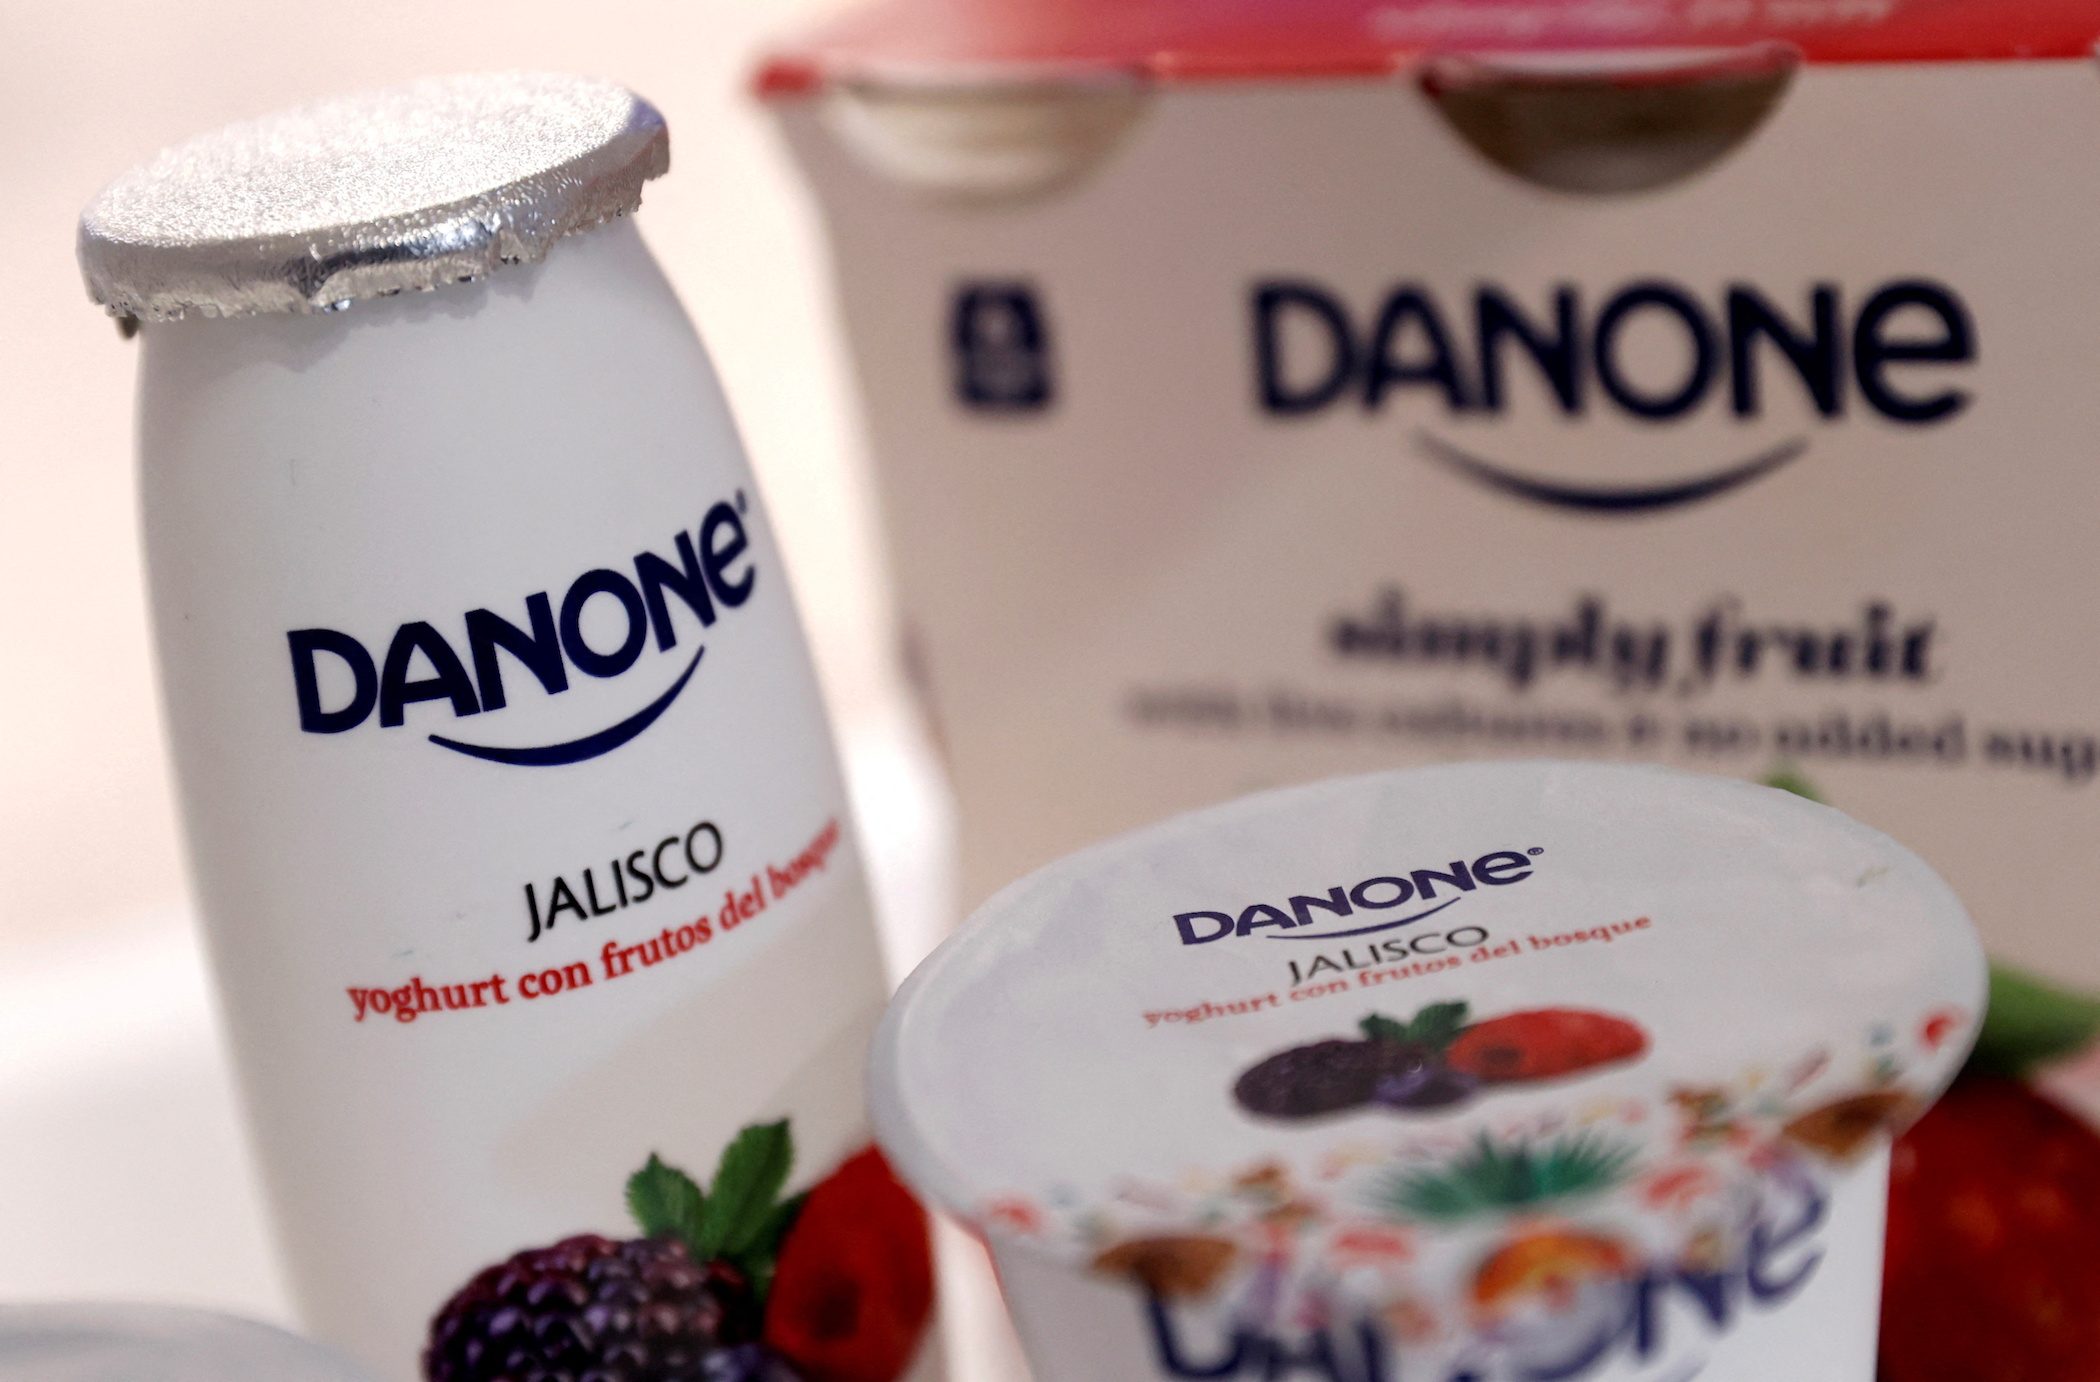 French employers’ group boss defends Auchan, Danone staying in Russia